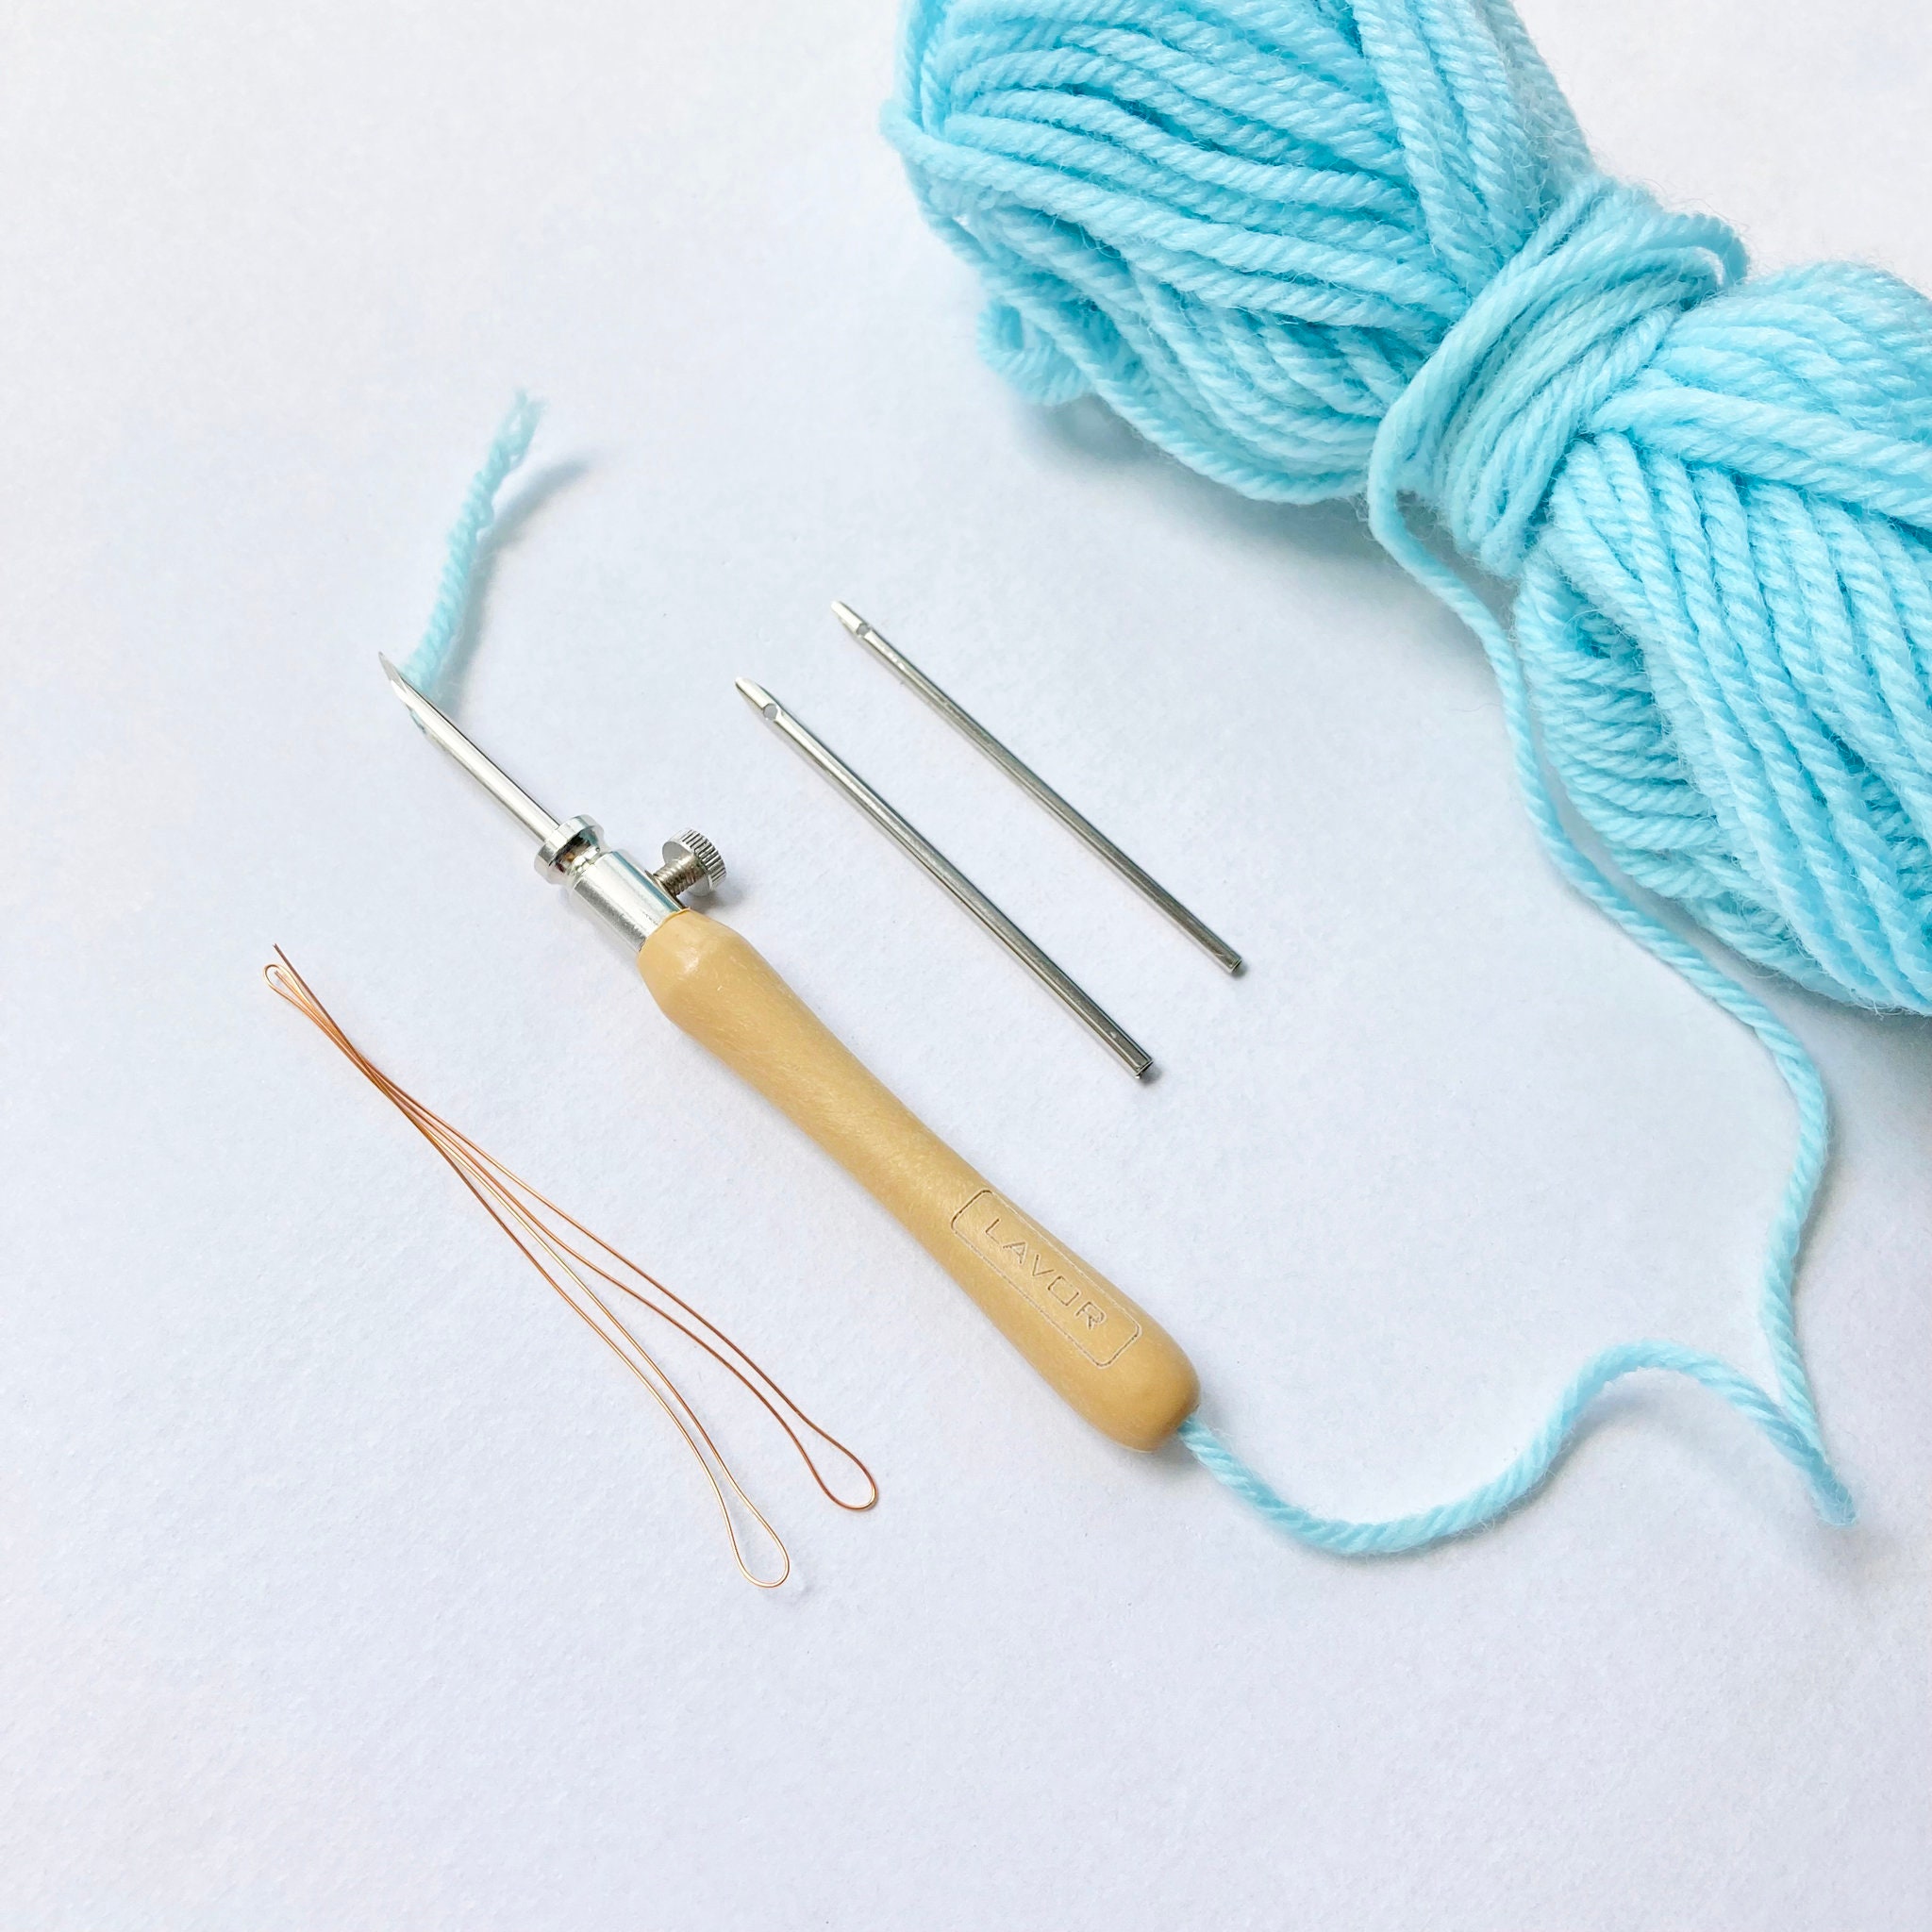 Punch Needle Kit for Beginners. Punch Needle Patterns. Punch Needle Supplies.  Punch Needle UK. Punch Needle Starter Kit. Make Your Own 